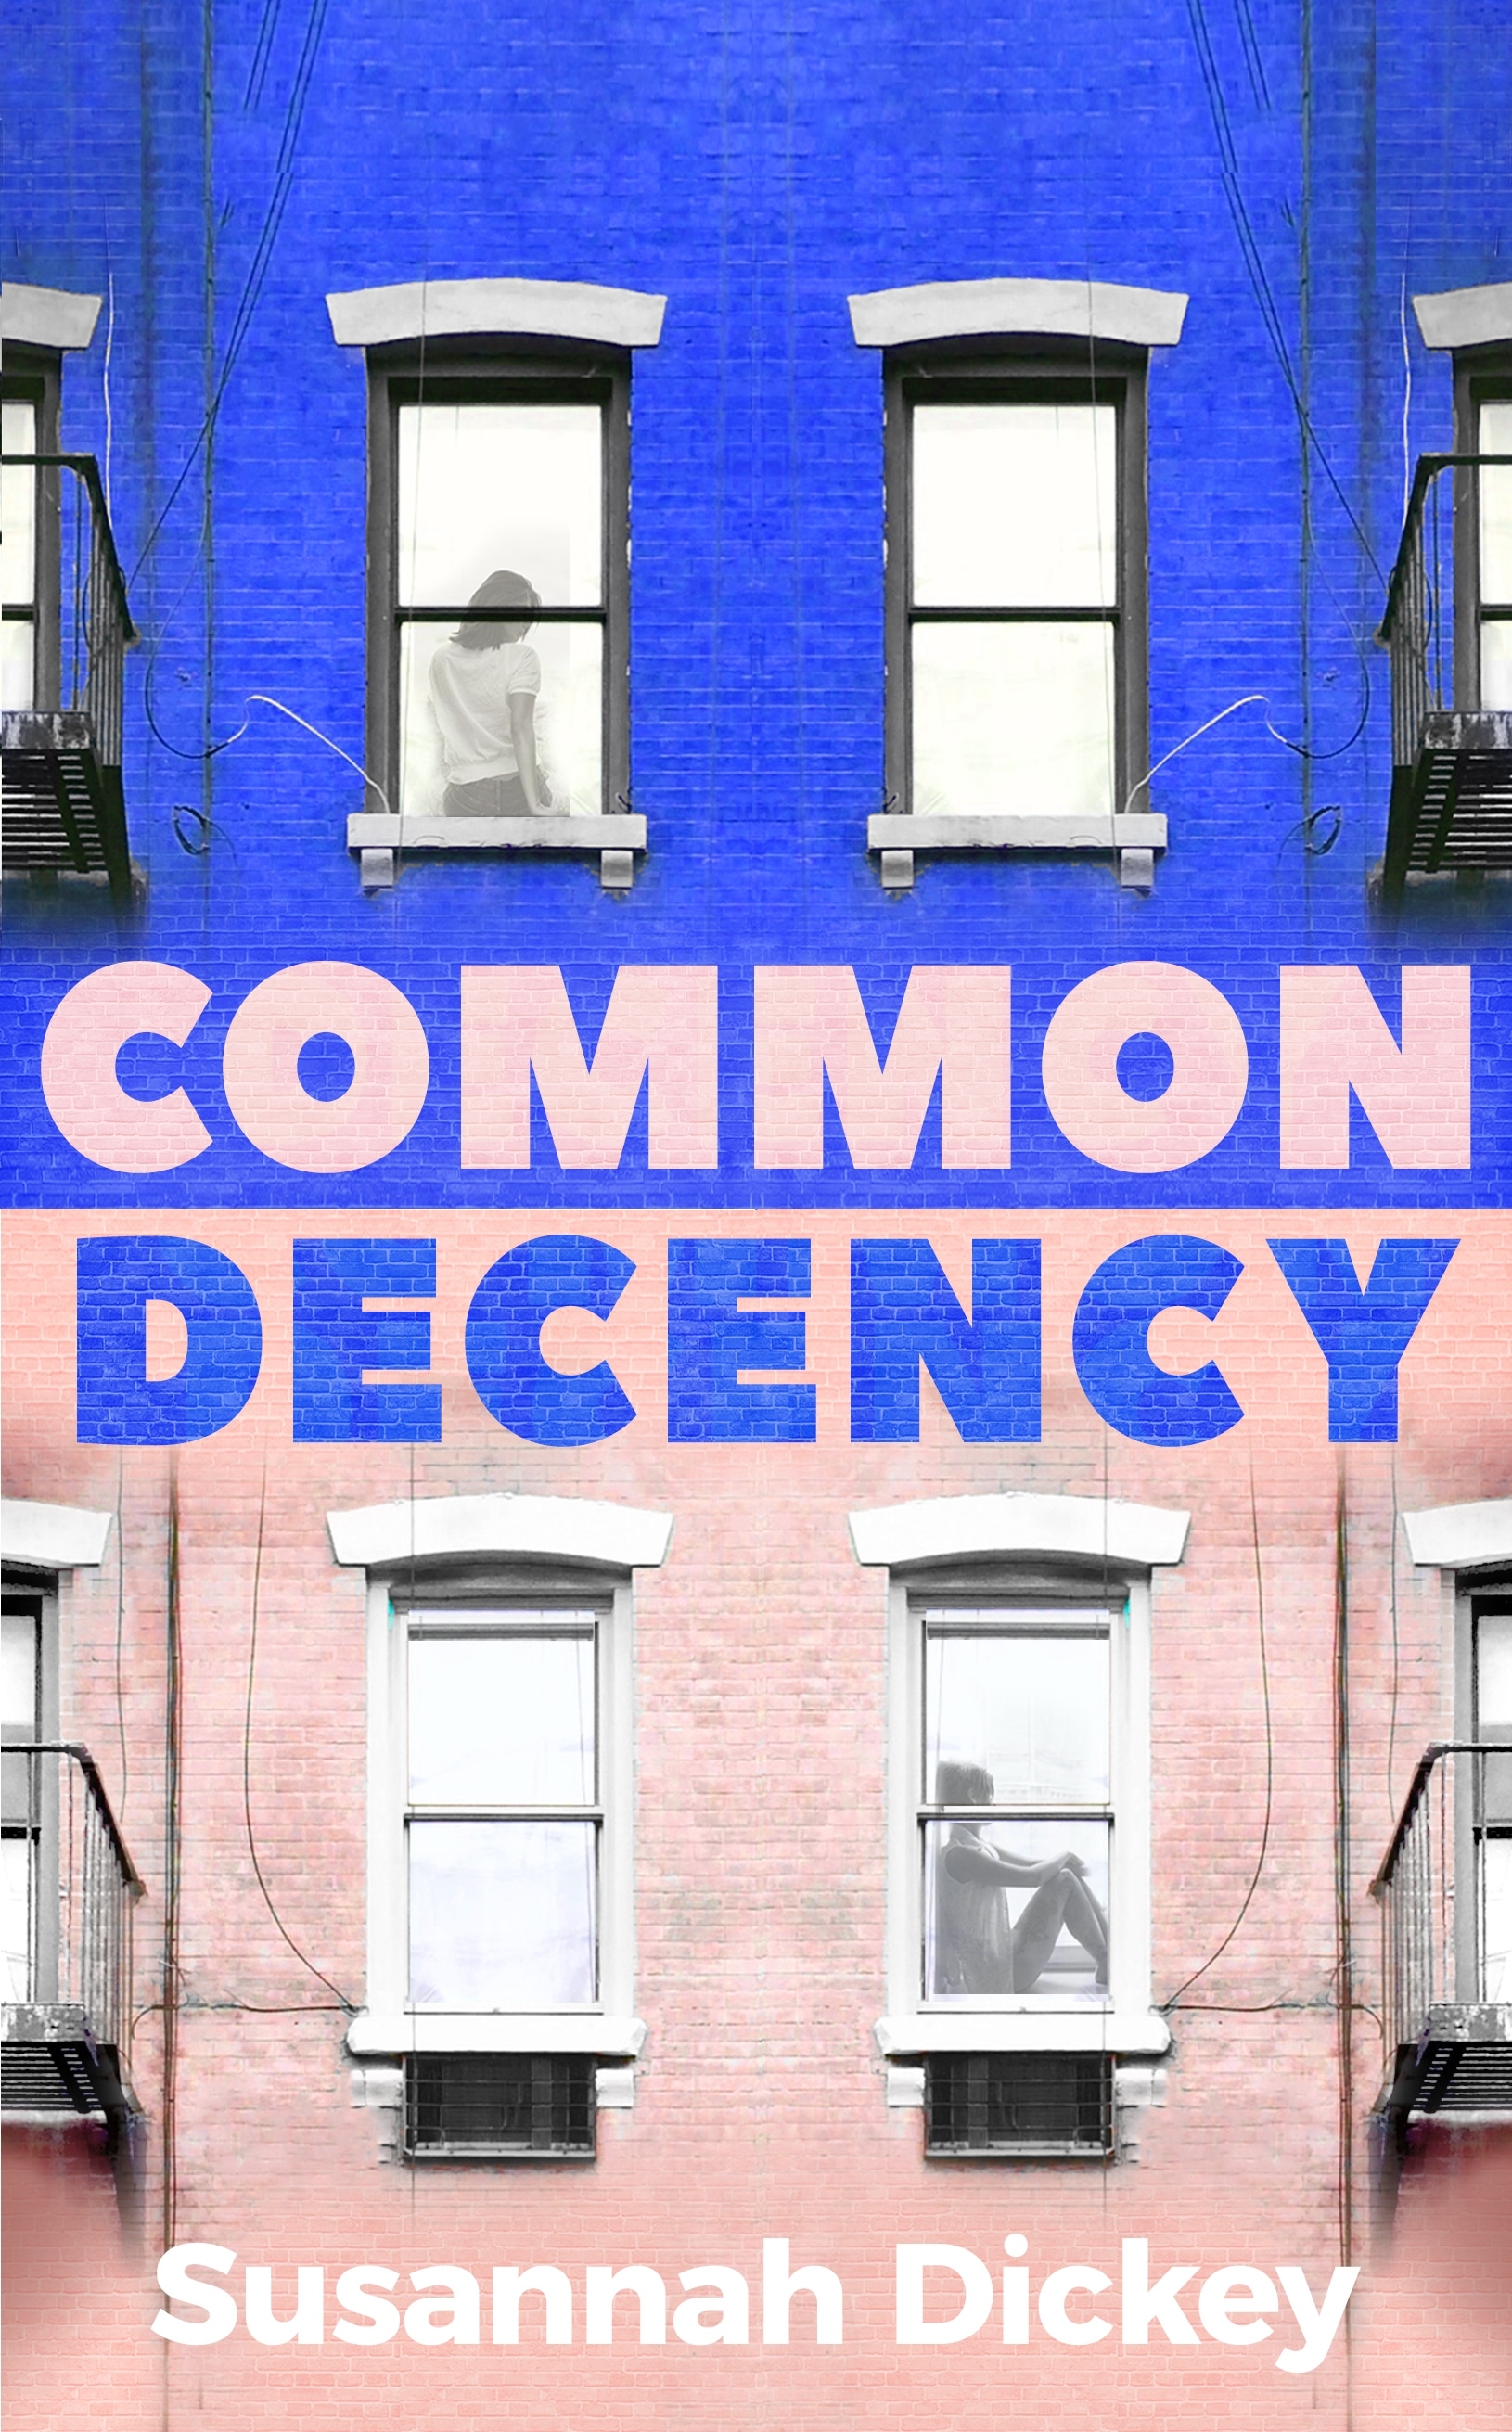 Book “Common Decency” by Susannah Dickey — July 14, 2022